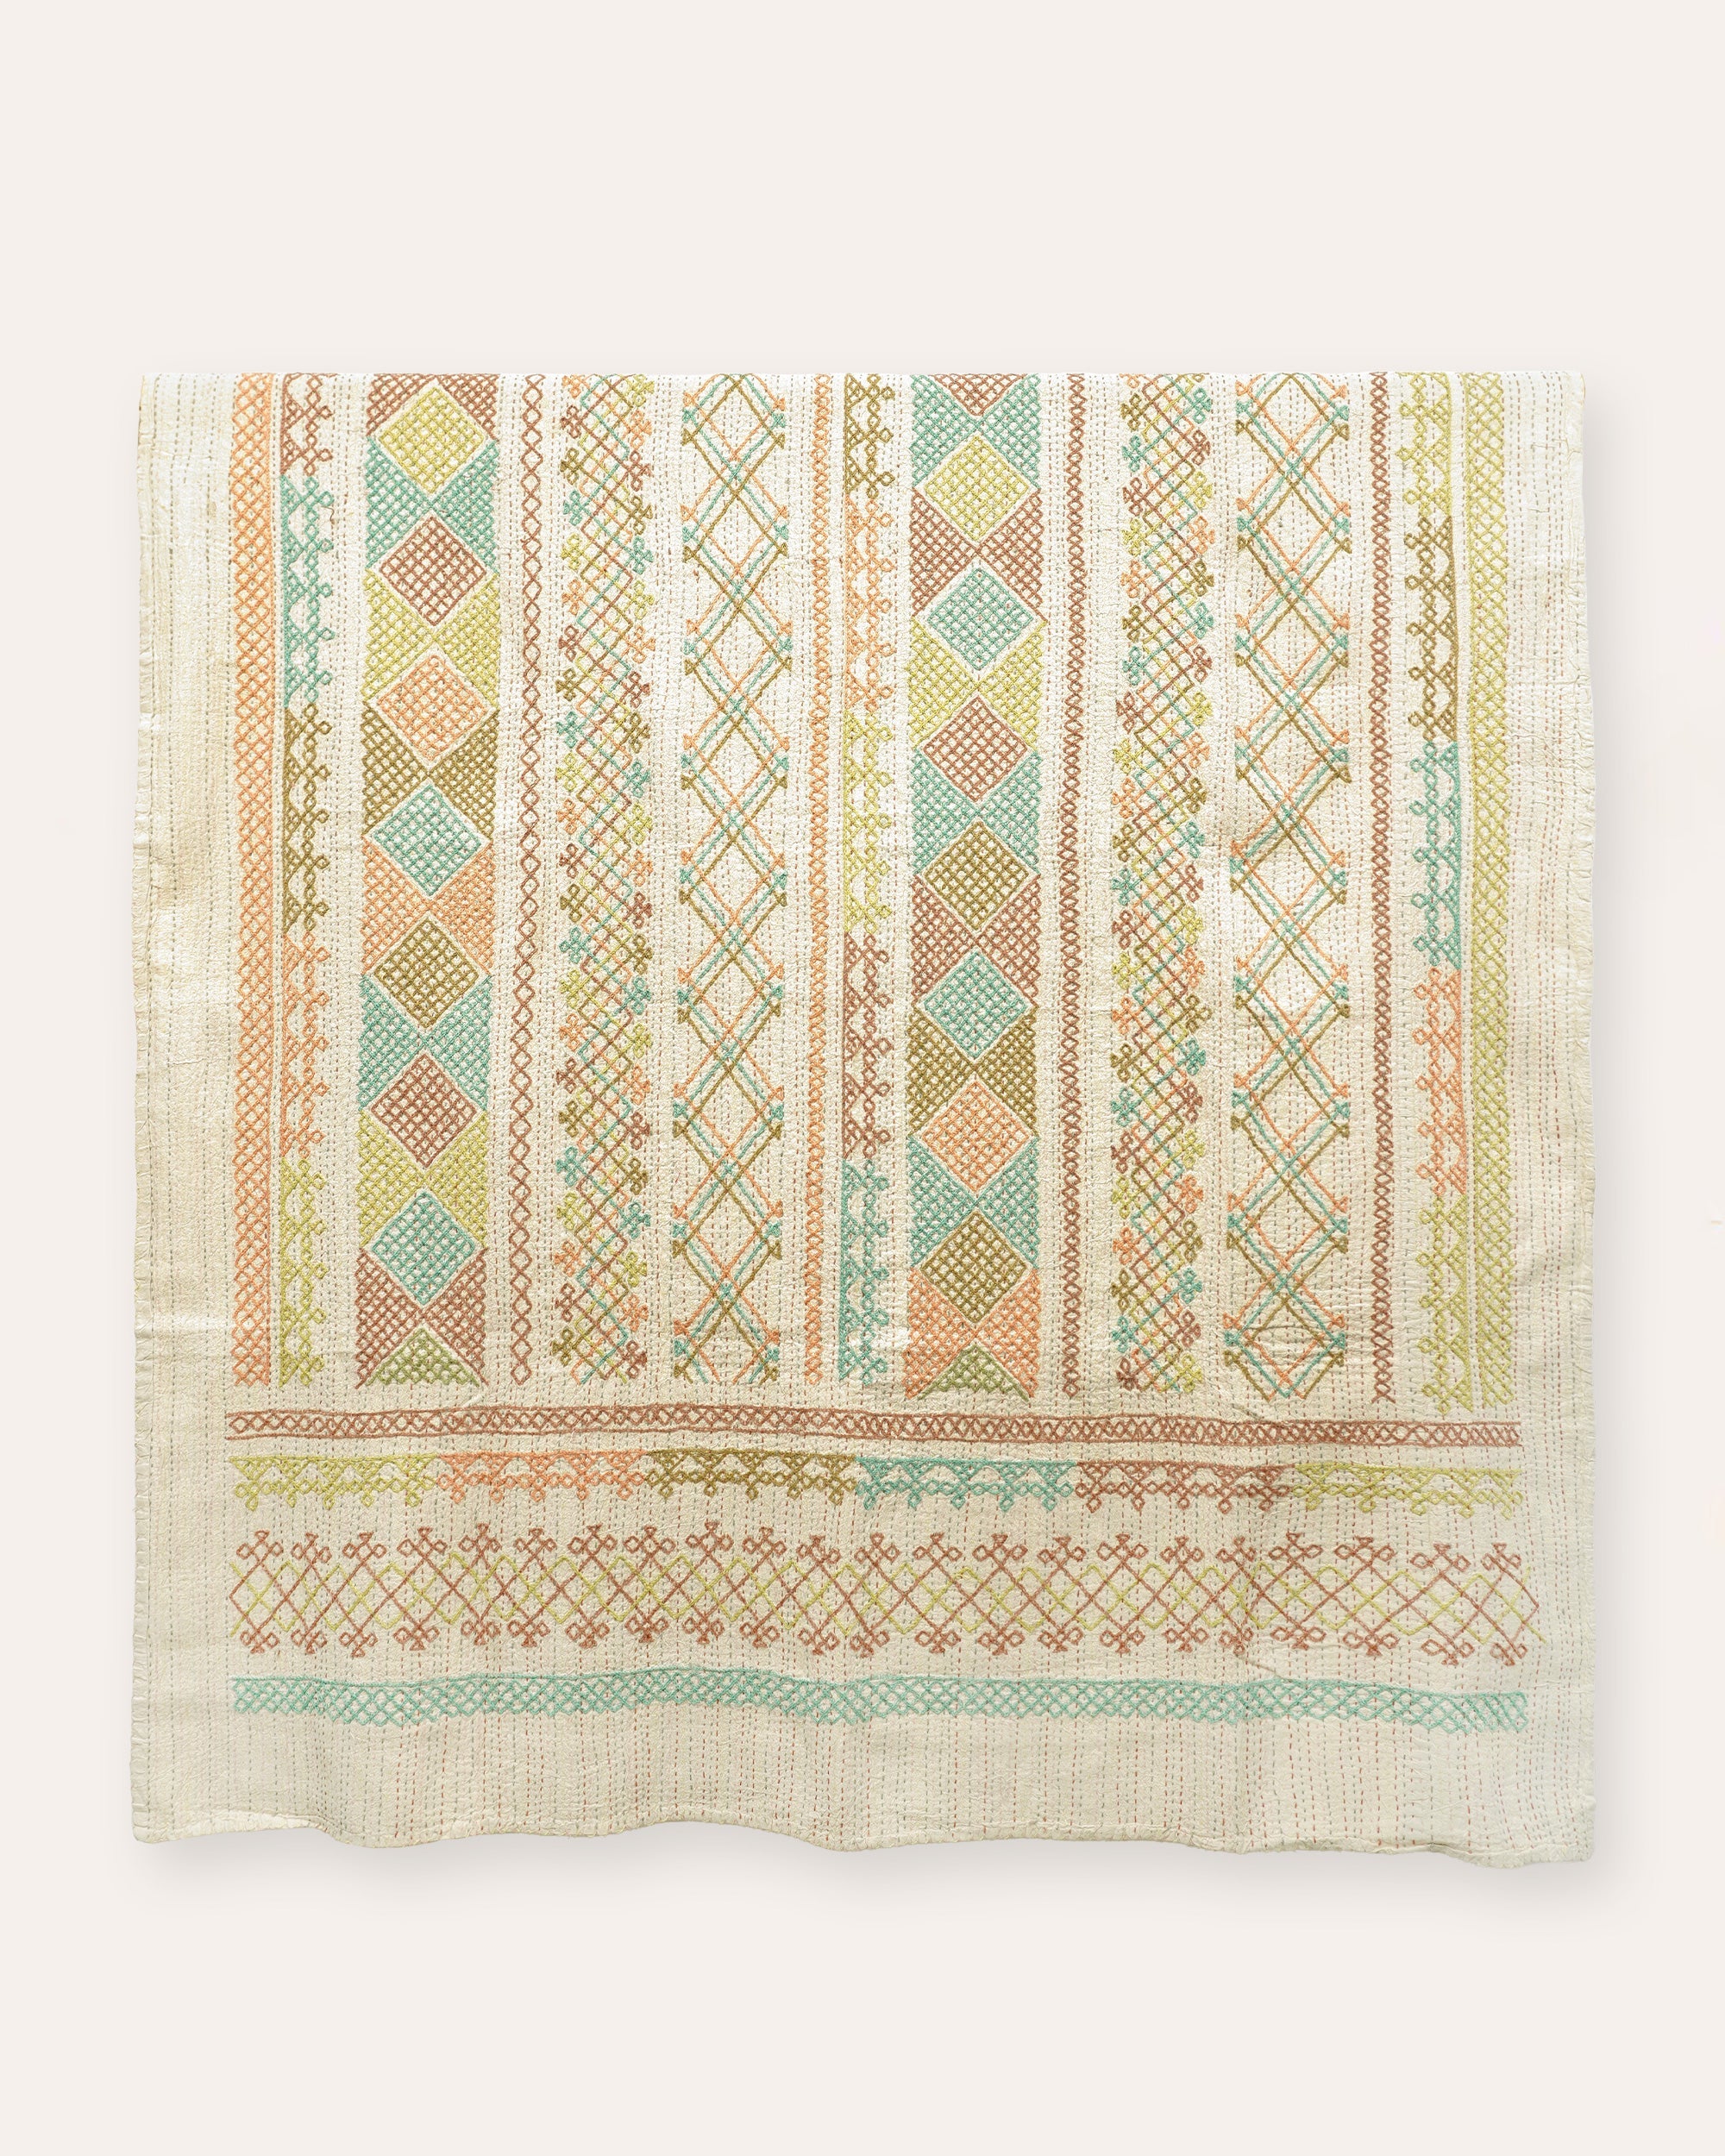 Limited Edition Kantha Throw XIII/XV